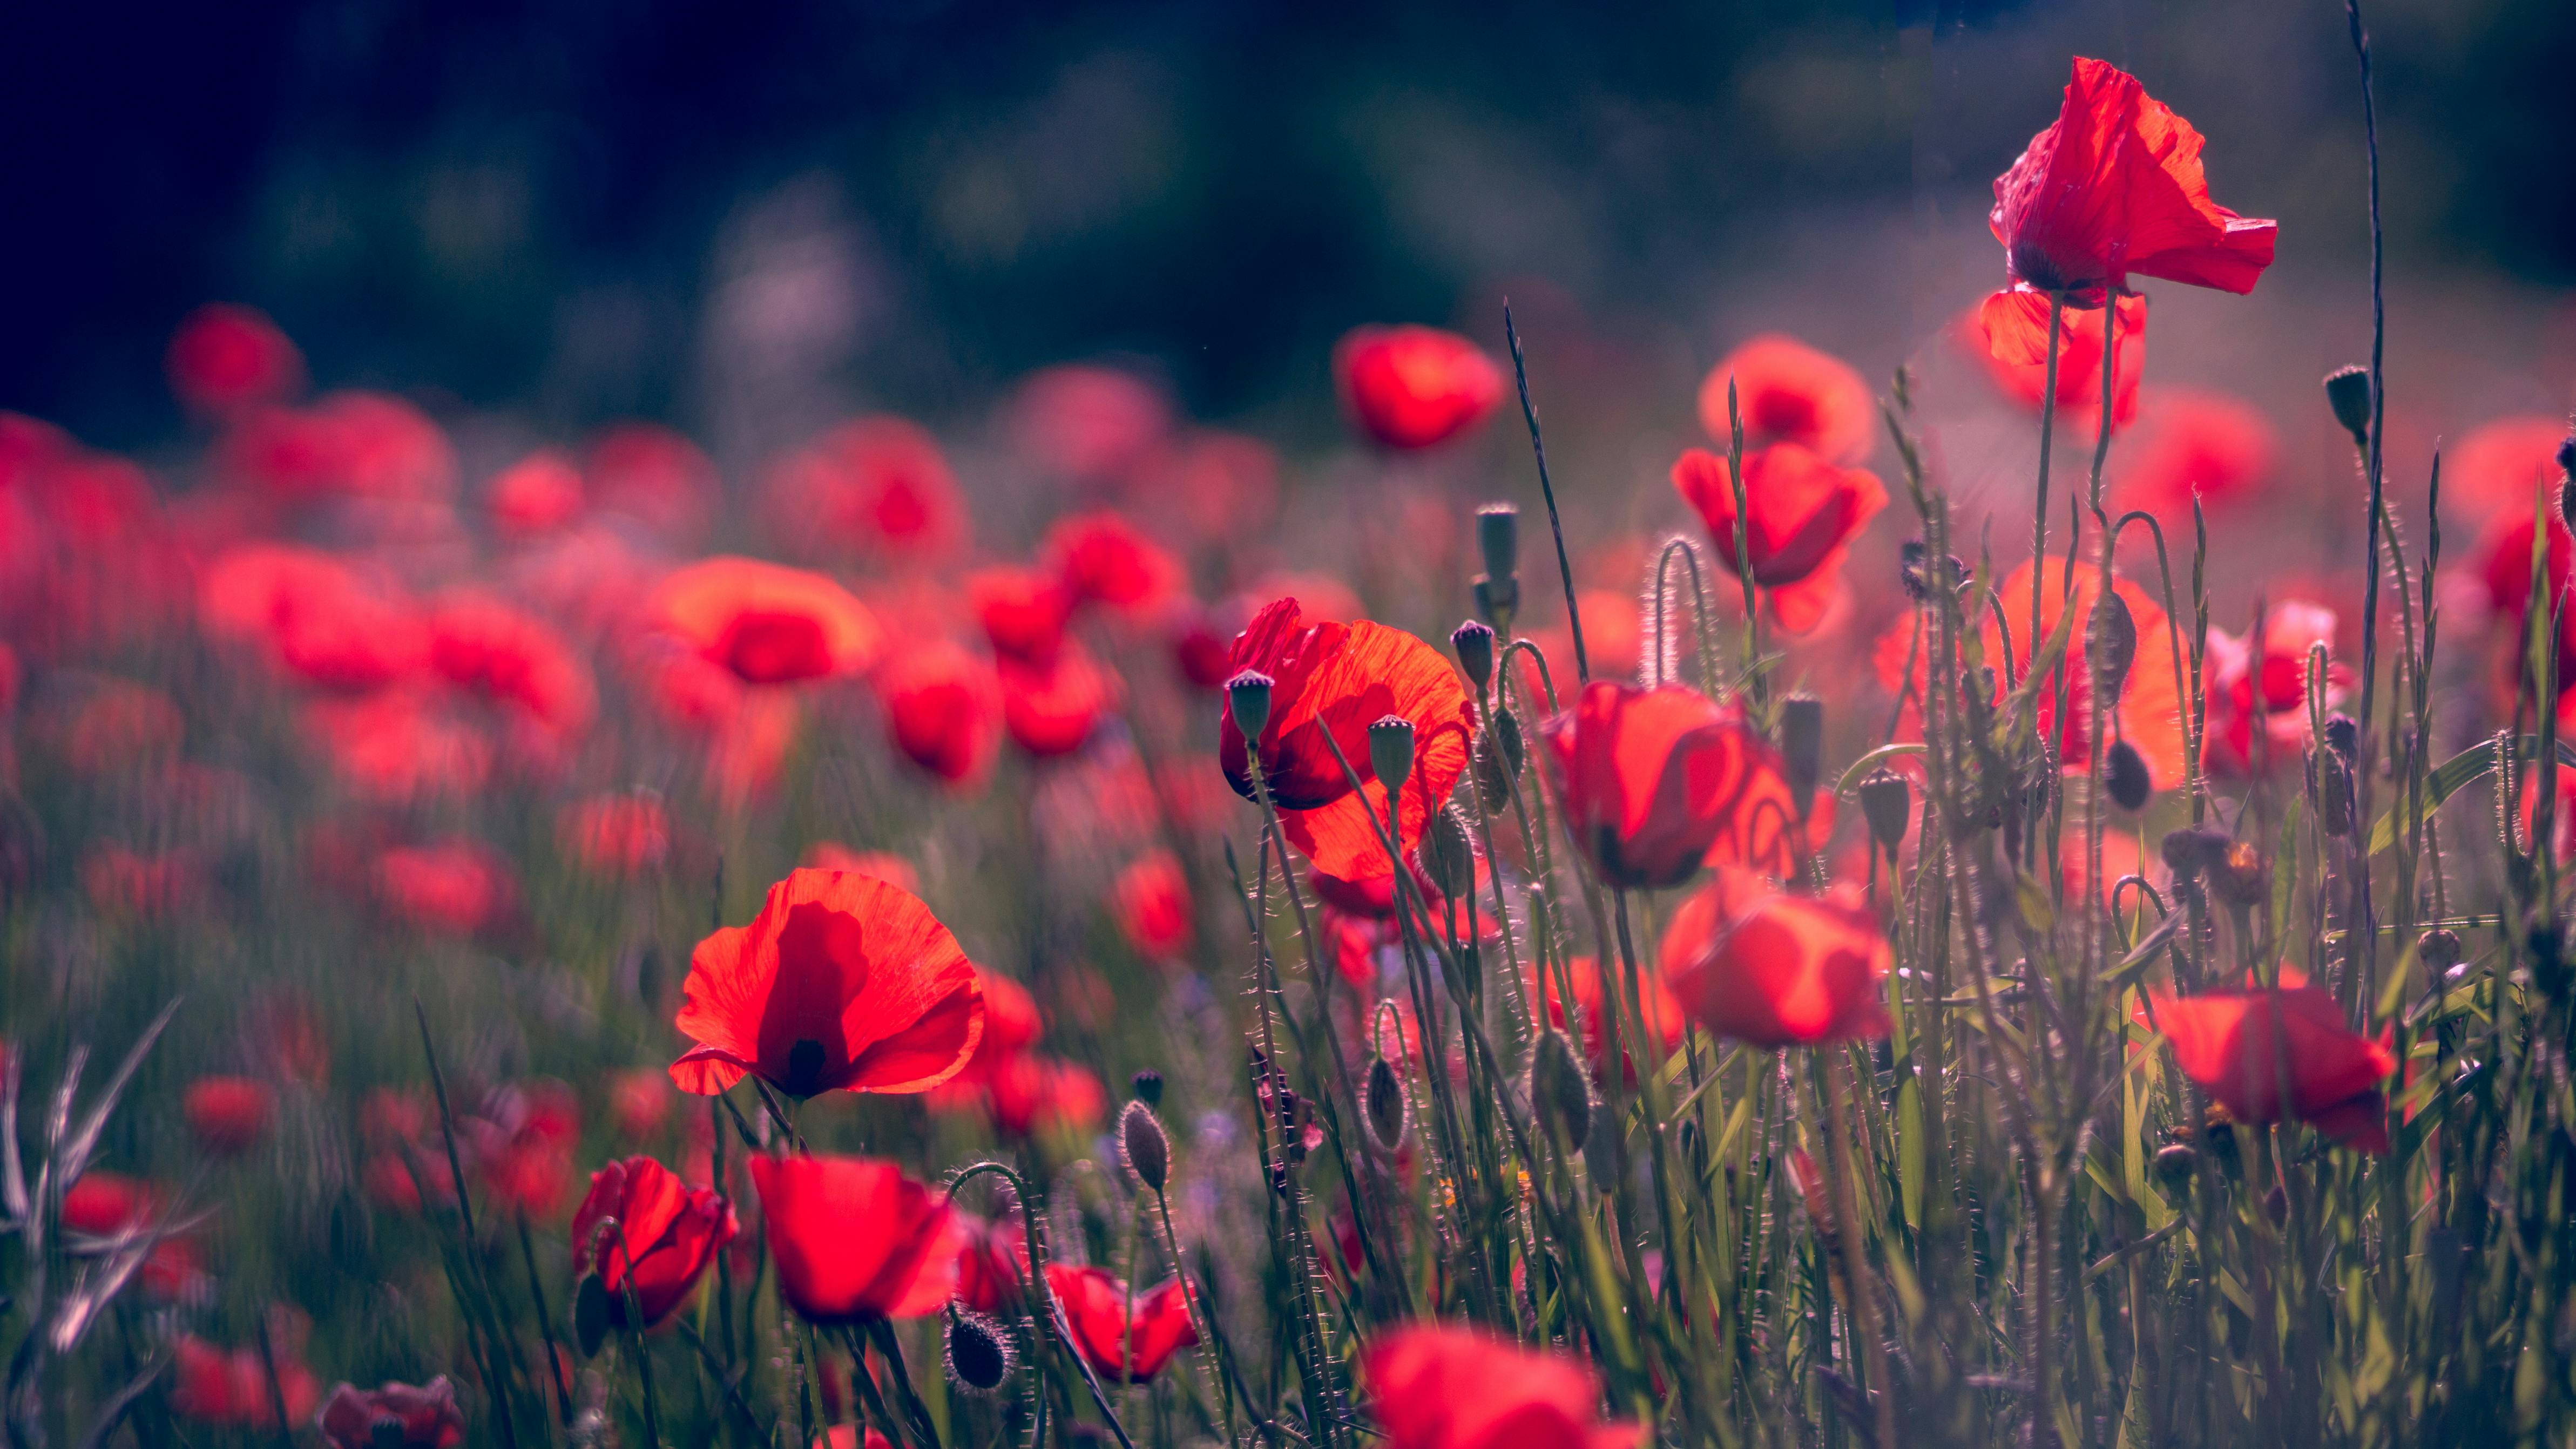 Red Flower Background - High-quality Free Backgrounds